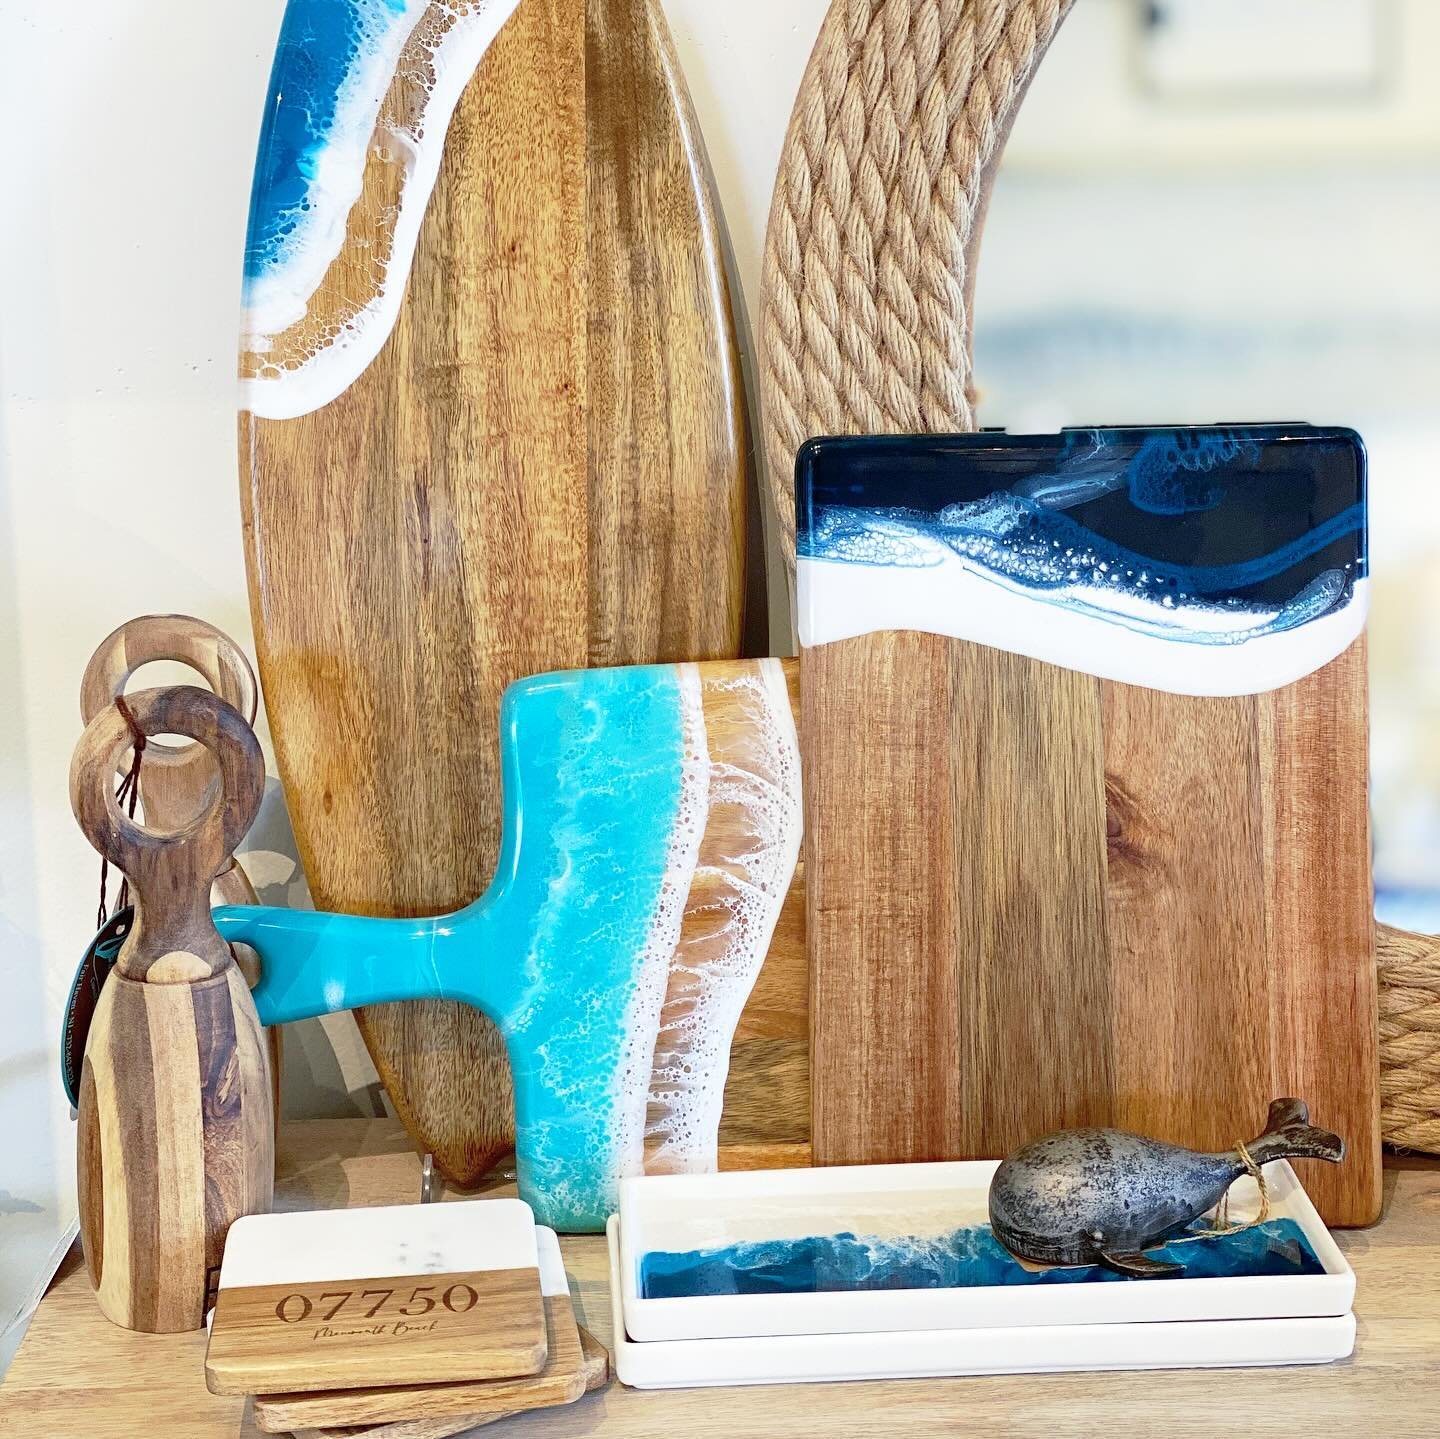 Cutting boards or kitchen art? 
Restocked with beautiful hand made resin cutting boards, trays, and coasters that will bring functional art into your home. 

.
#CoastalDecor #CoastalLiving  #MonmouthBeachNJ #BeachDecor #CuttingBoards #MonmouthCountyD